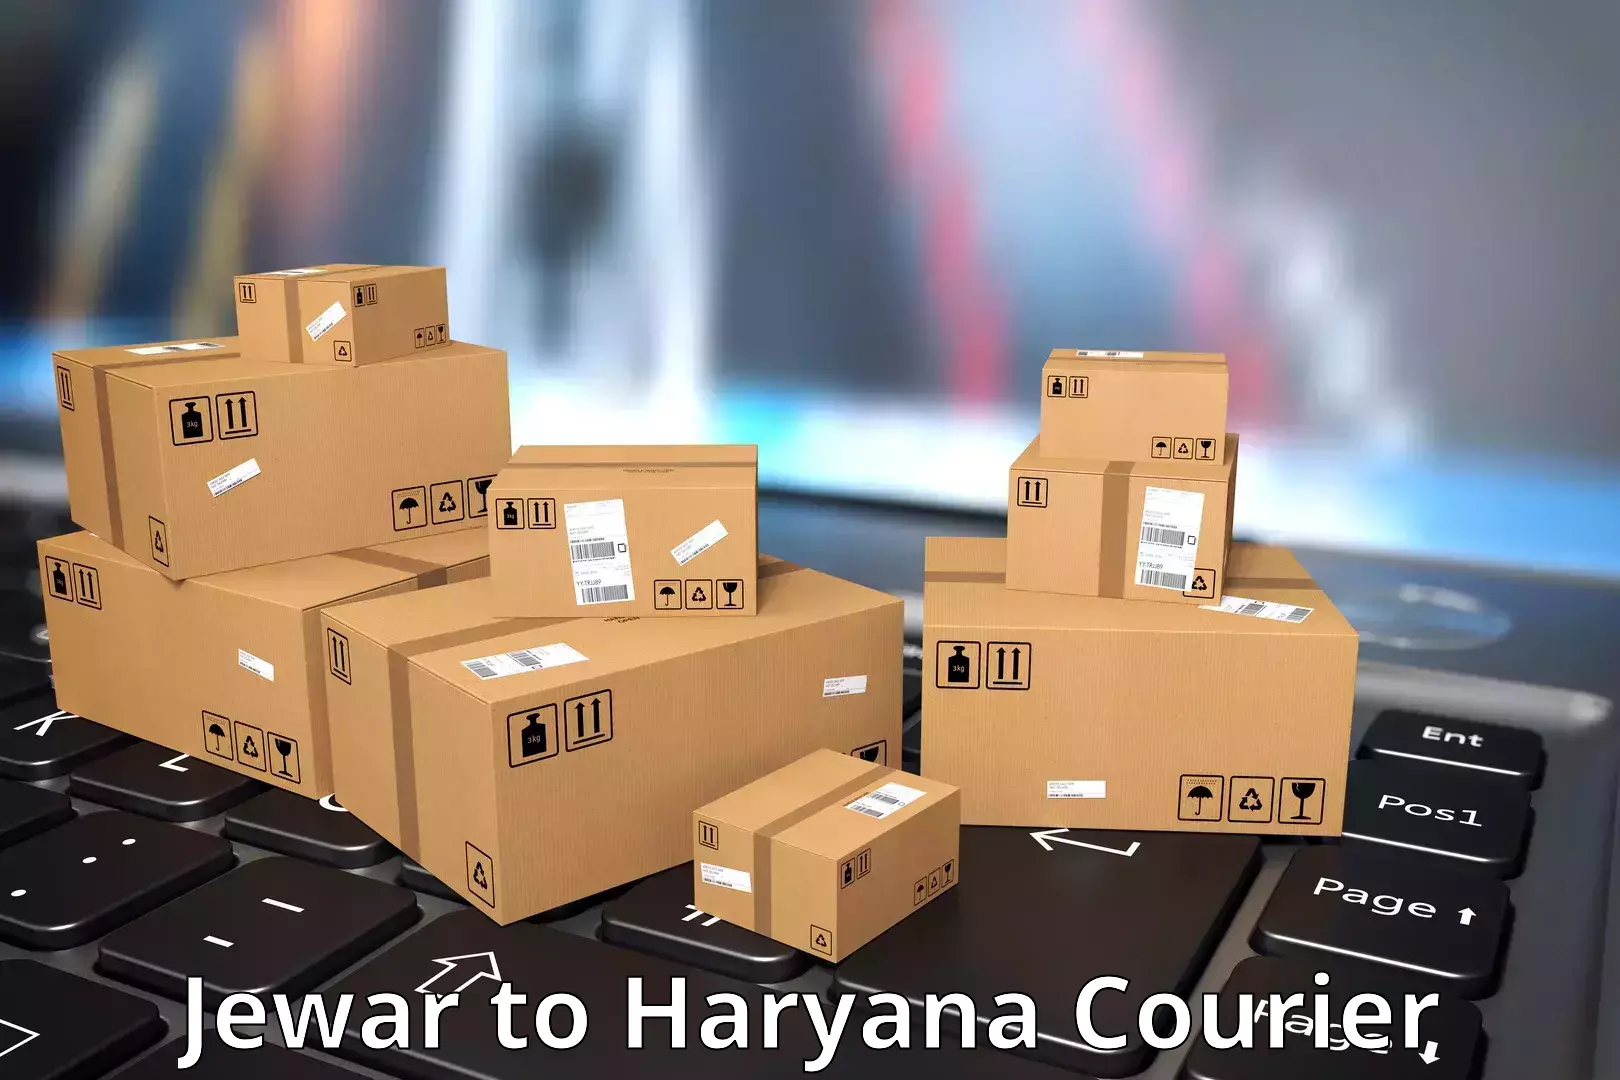 User-friendly delivery service Jewar to Haryana